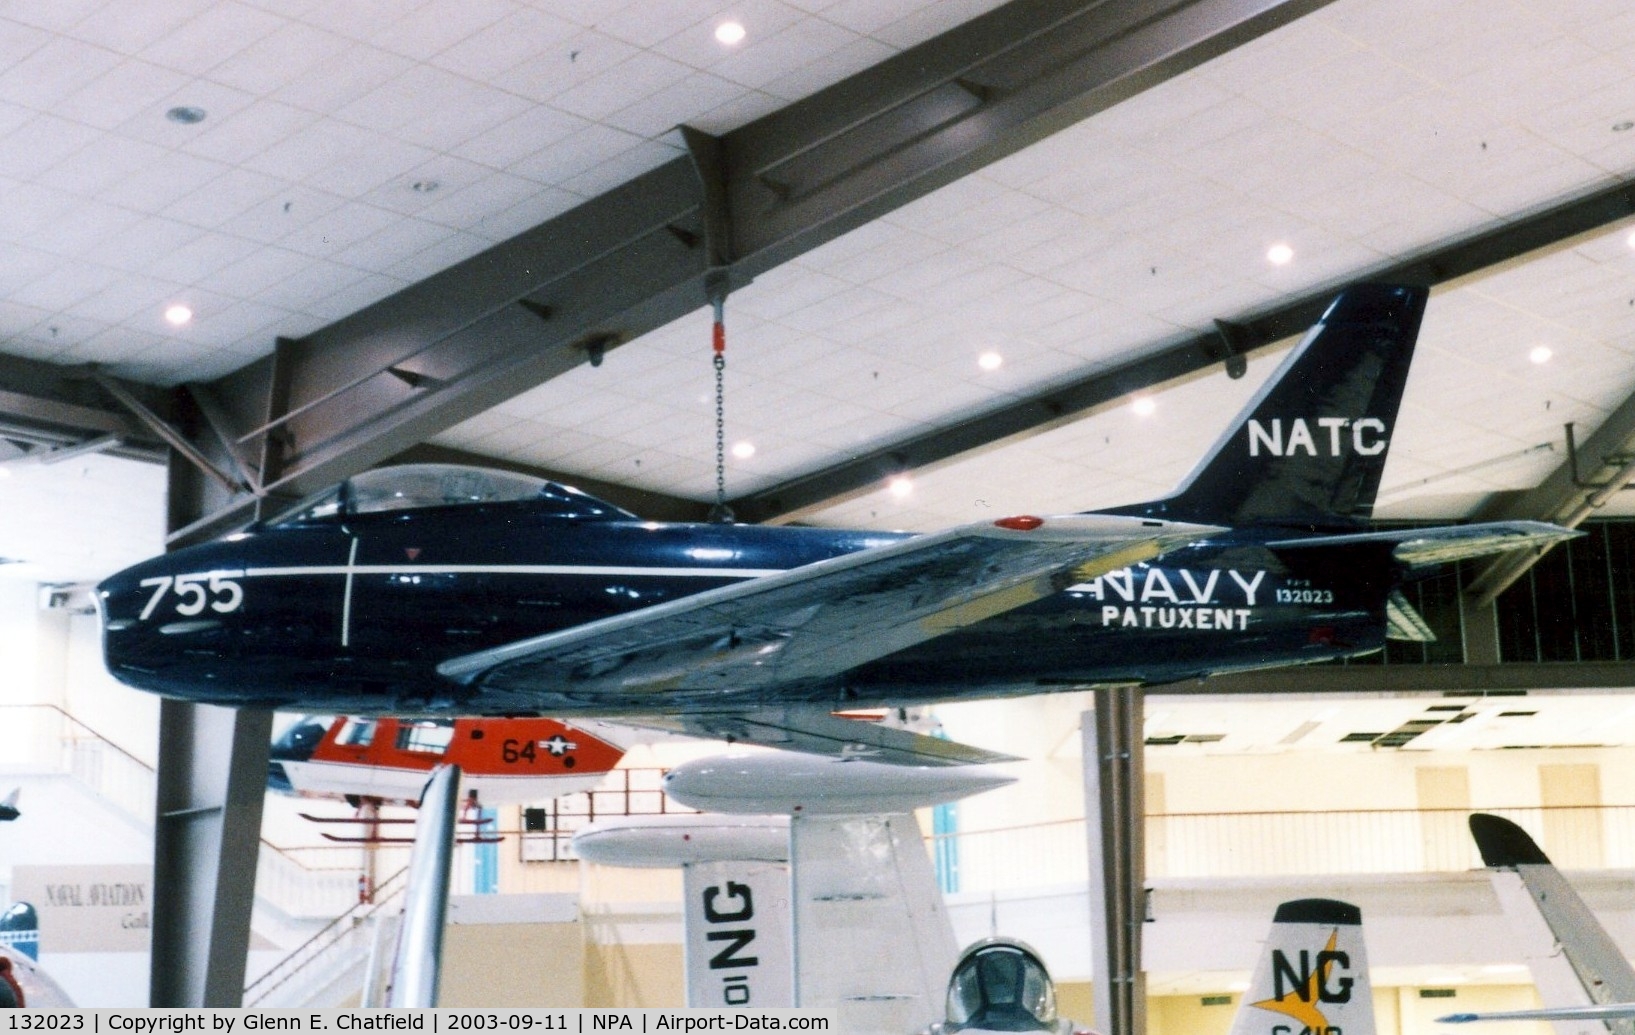 132023, North American FJ-2 Fury C/N Not found 132023, F-1B/FJ-2 at the National Museum of Naval Aviation